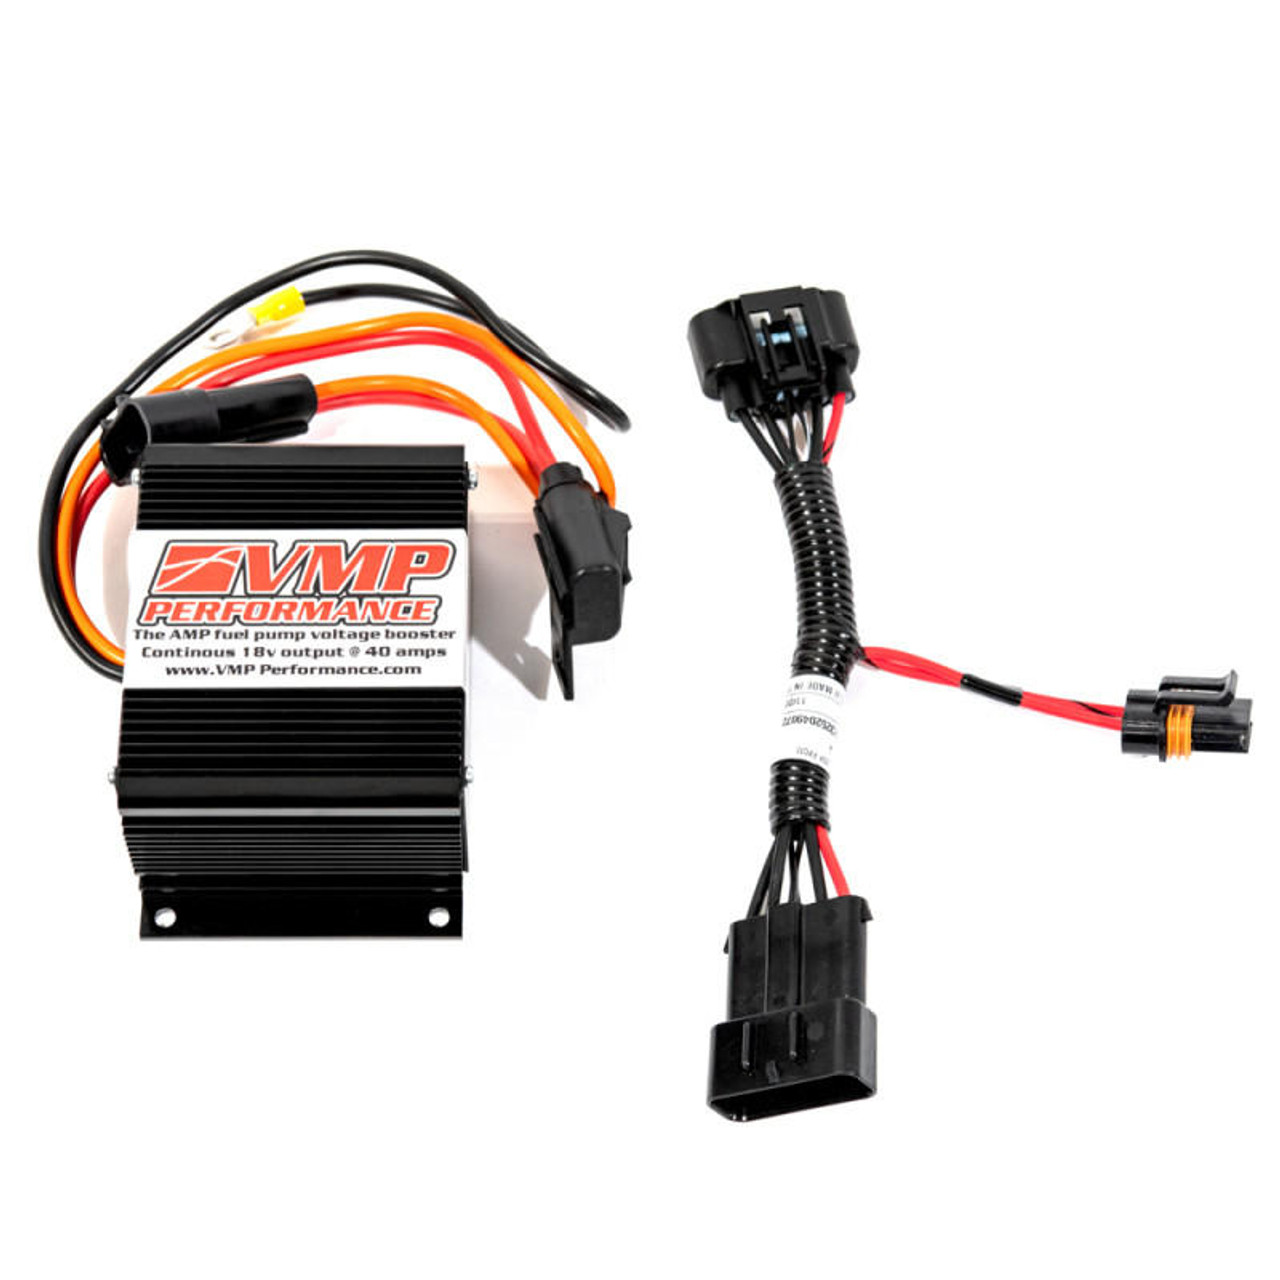  VMP Performance 05-10 Ford Mustang Plug and Play Fuel Pump Voltage Booster - VMP-ENF010 